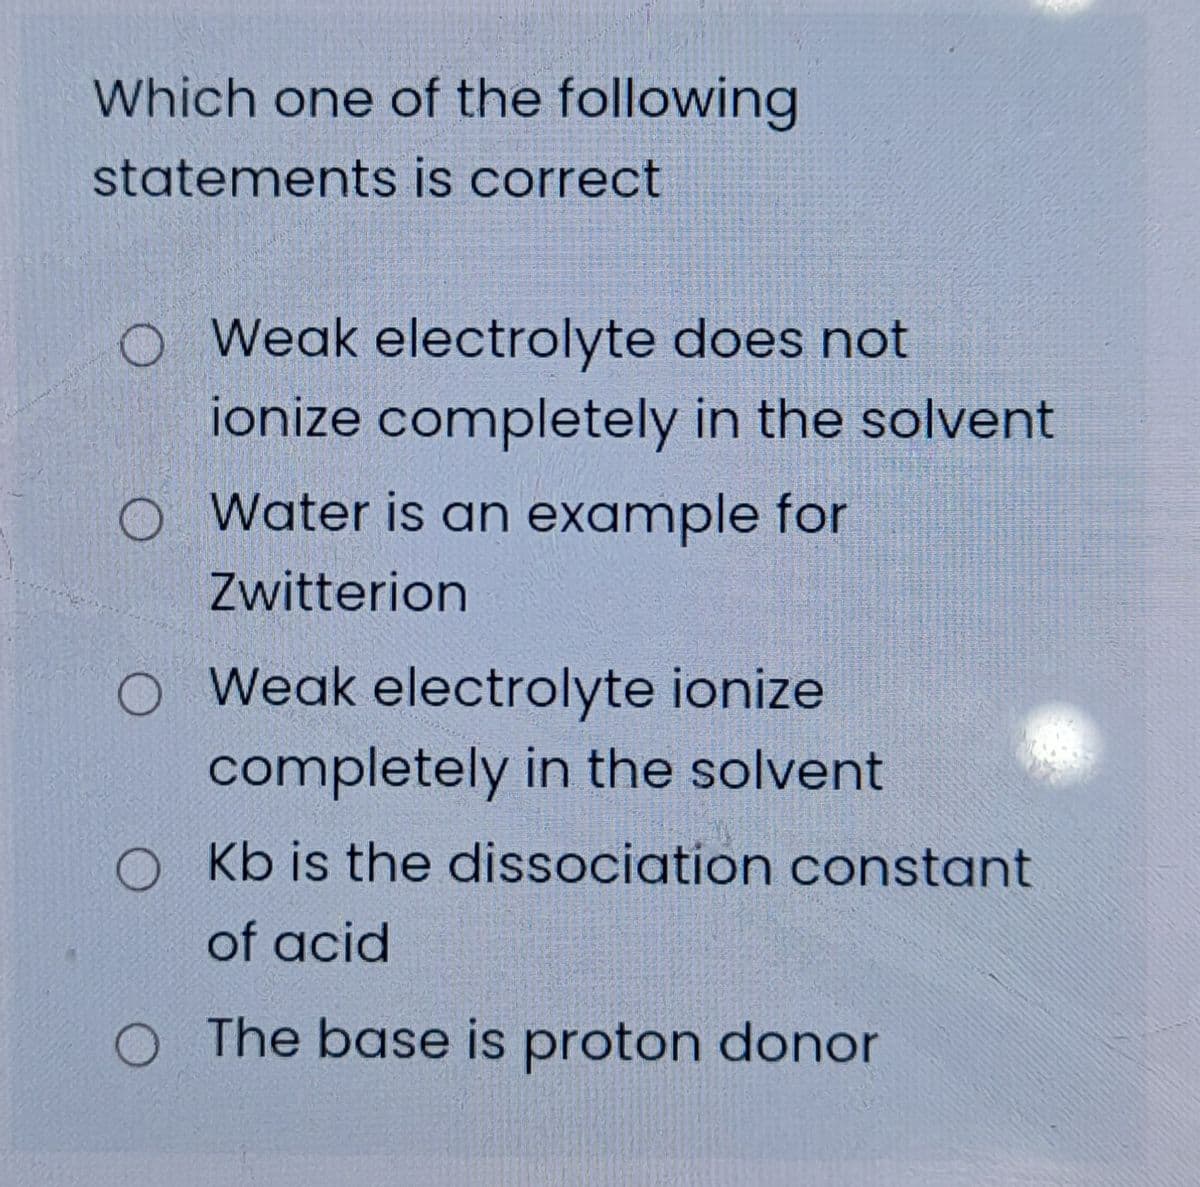 Which one of the following
statements is correct
O Weak electrolyte does not
ionize completely in the solvent
O Water is an example for
Zwitterion
O Weak electrolyte ionize
completely in the solvent
O Kb is the dissociation constant
of acid
O The base is proton donor
